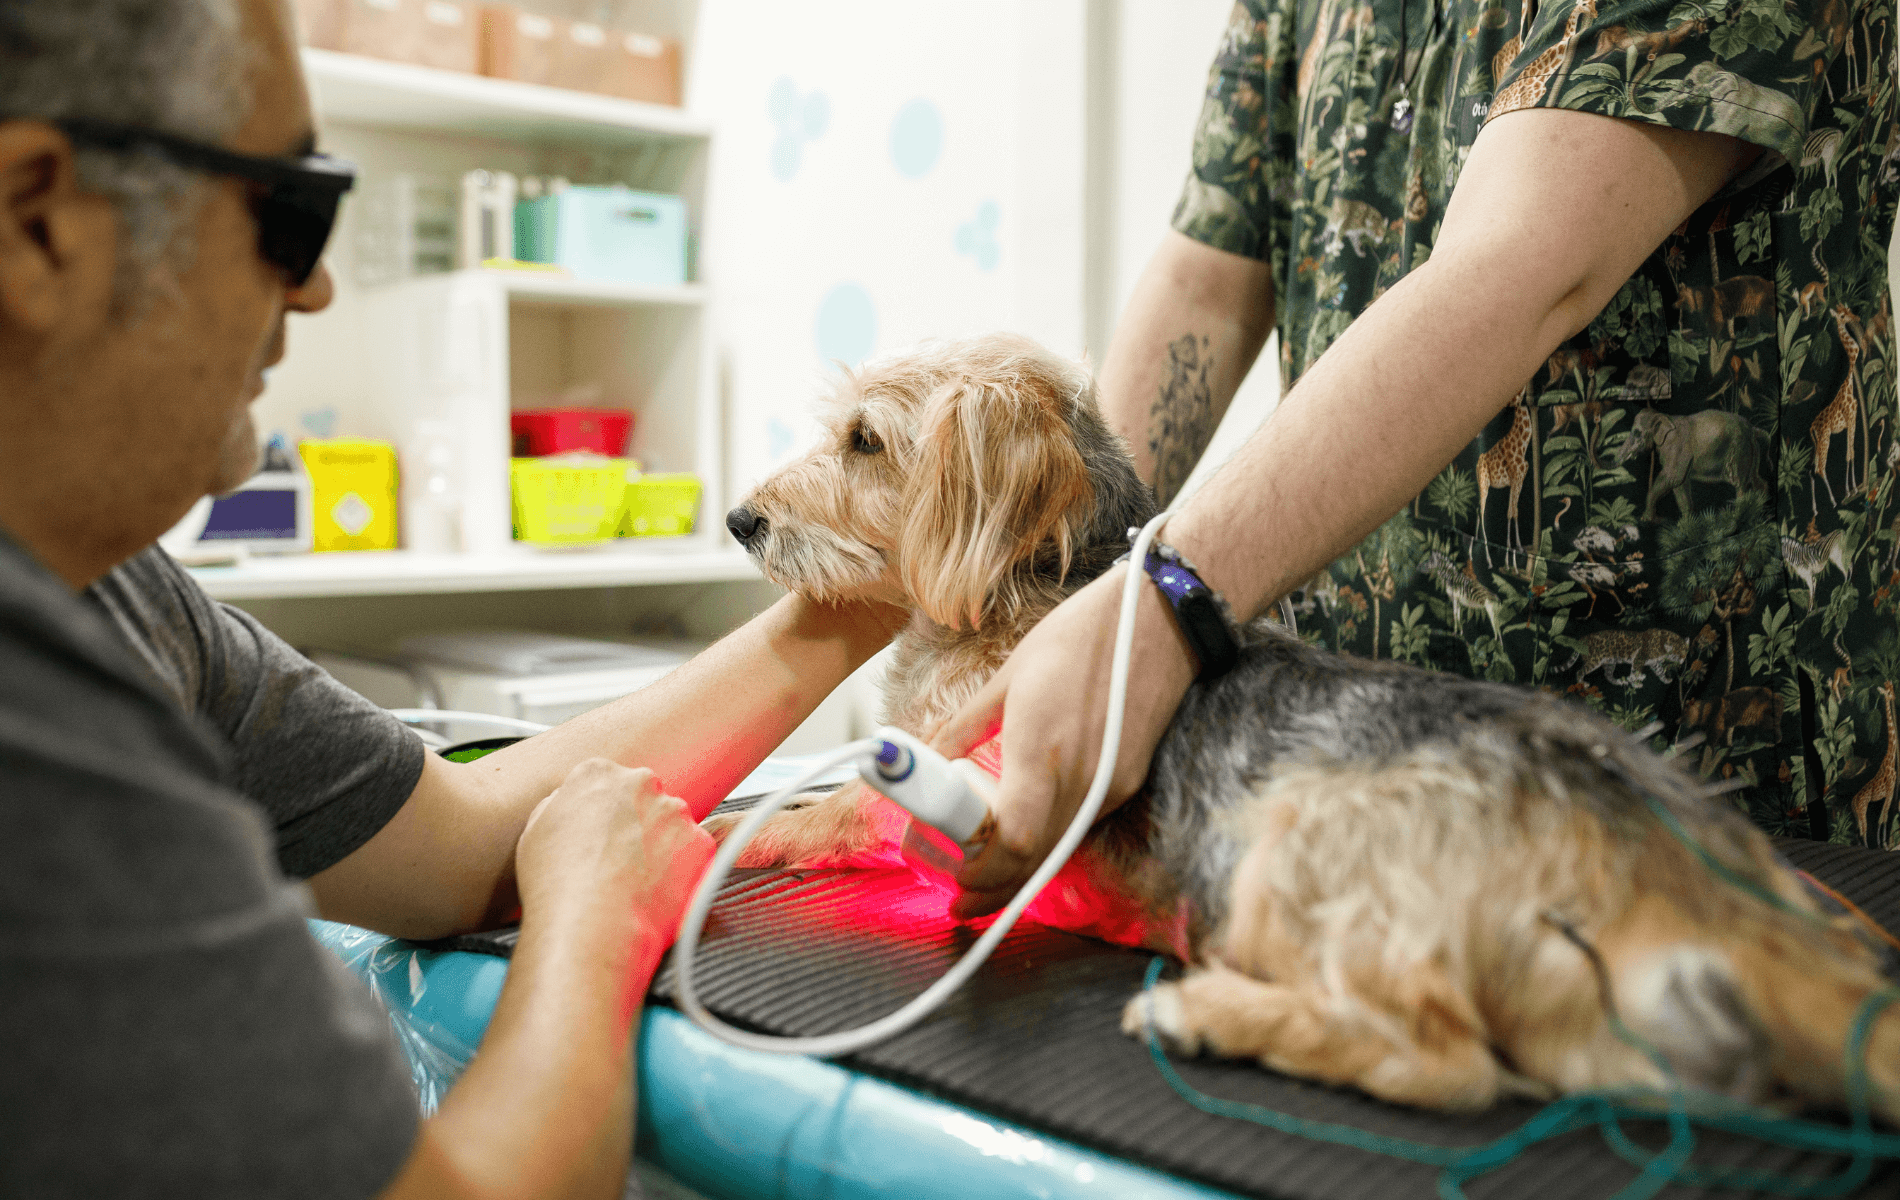 A dog being examined by a person